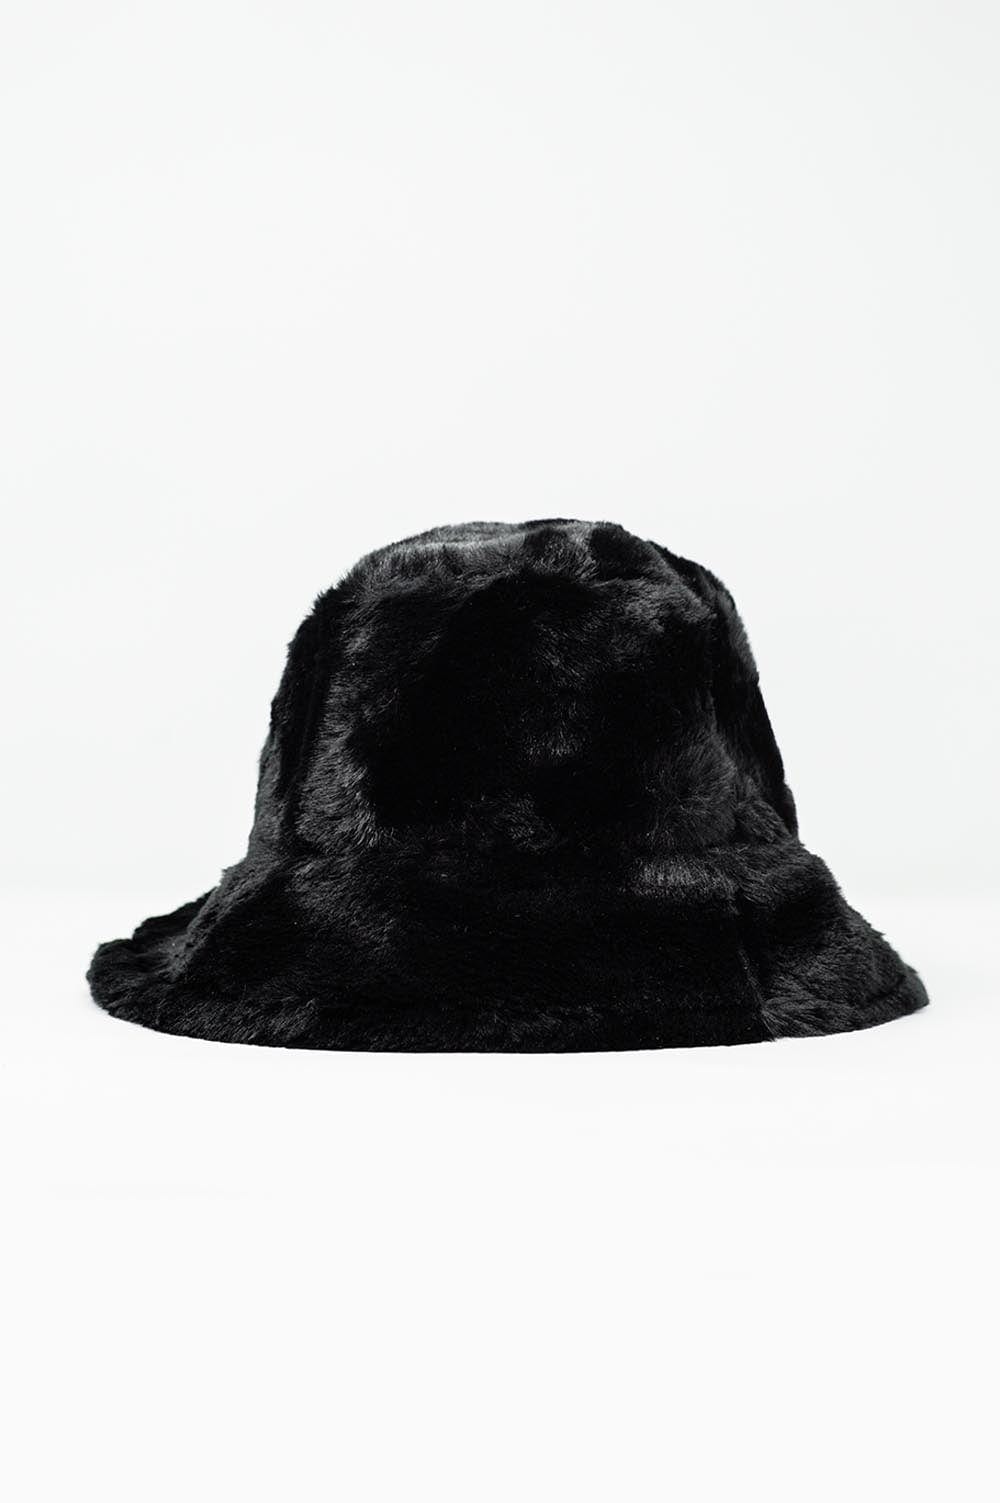 Q2 Women's Hat One Size / Black / China Reversible bucket hat in black with teddy turn up